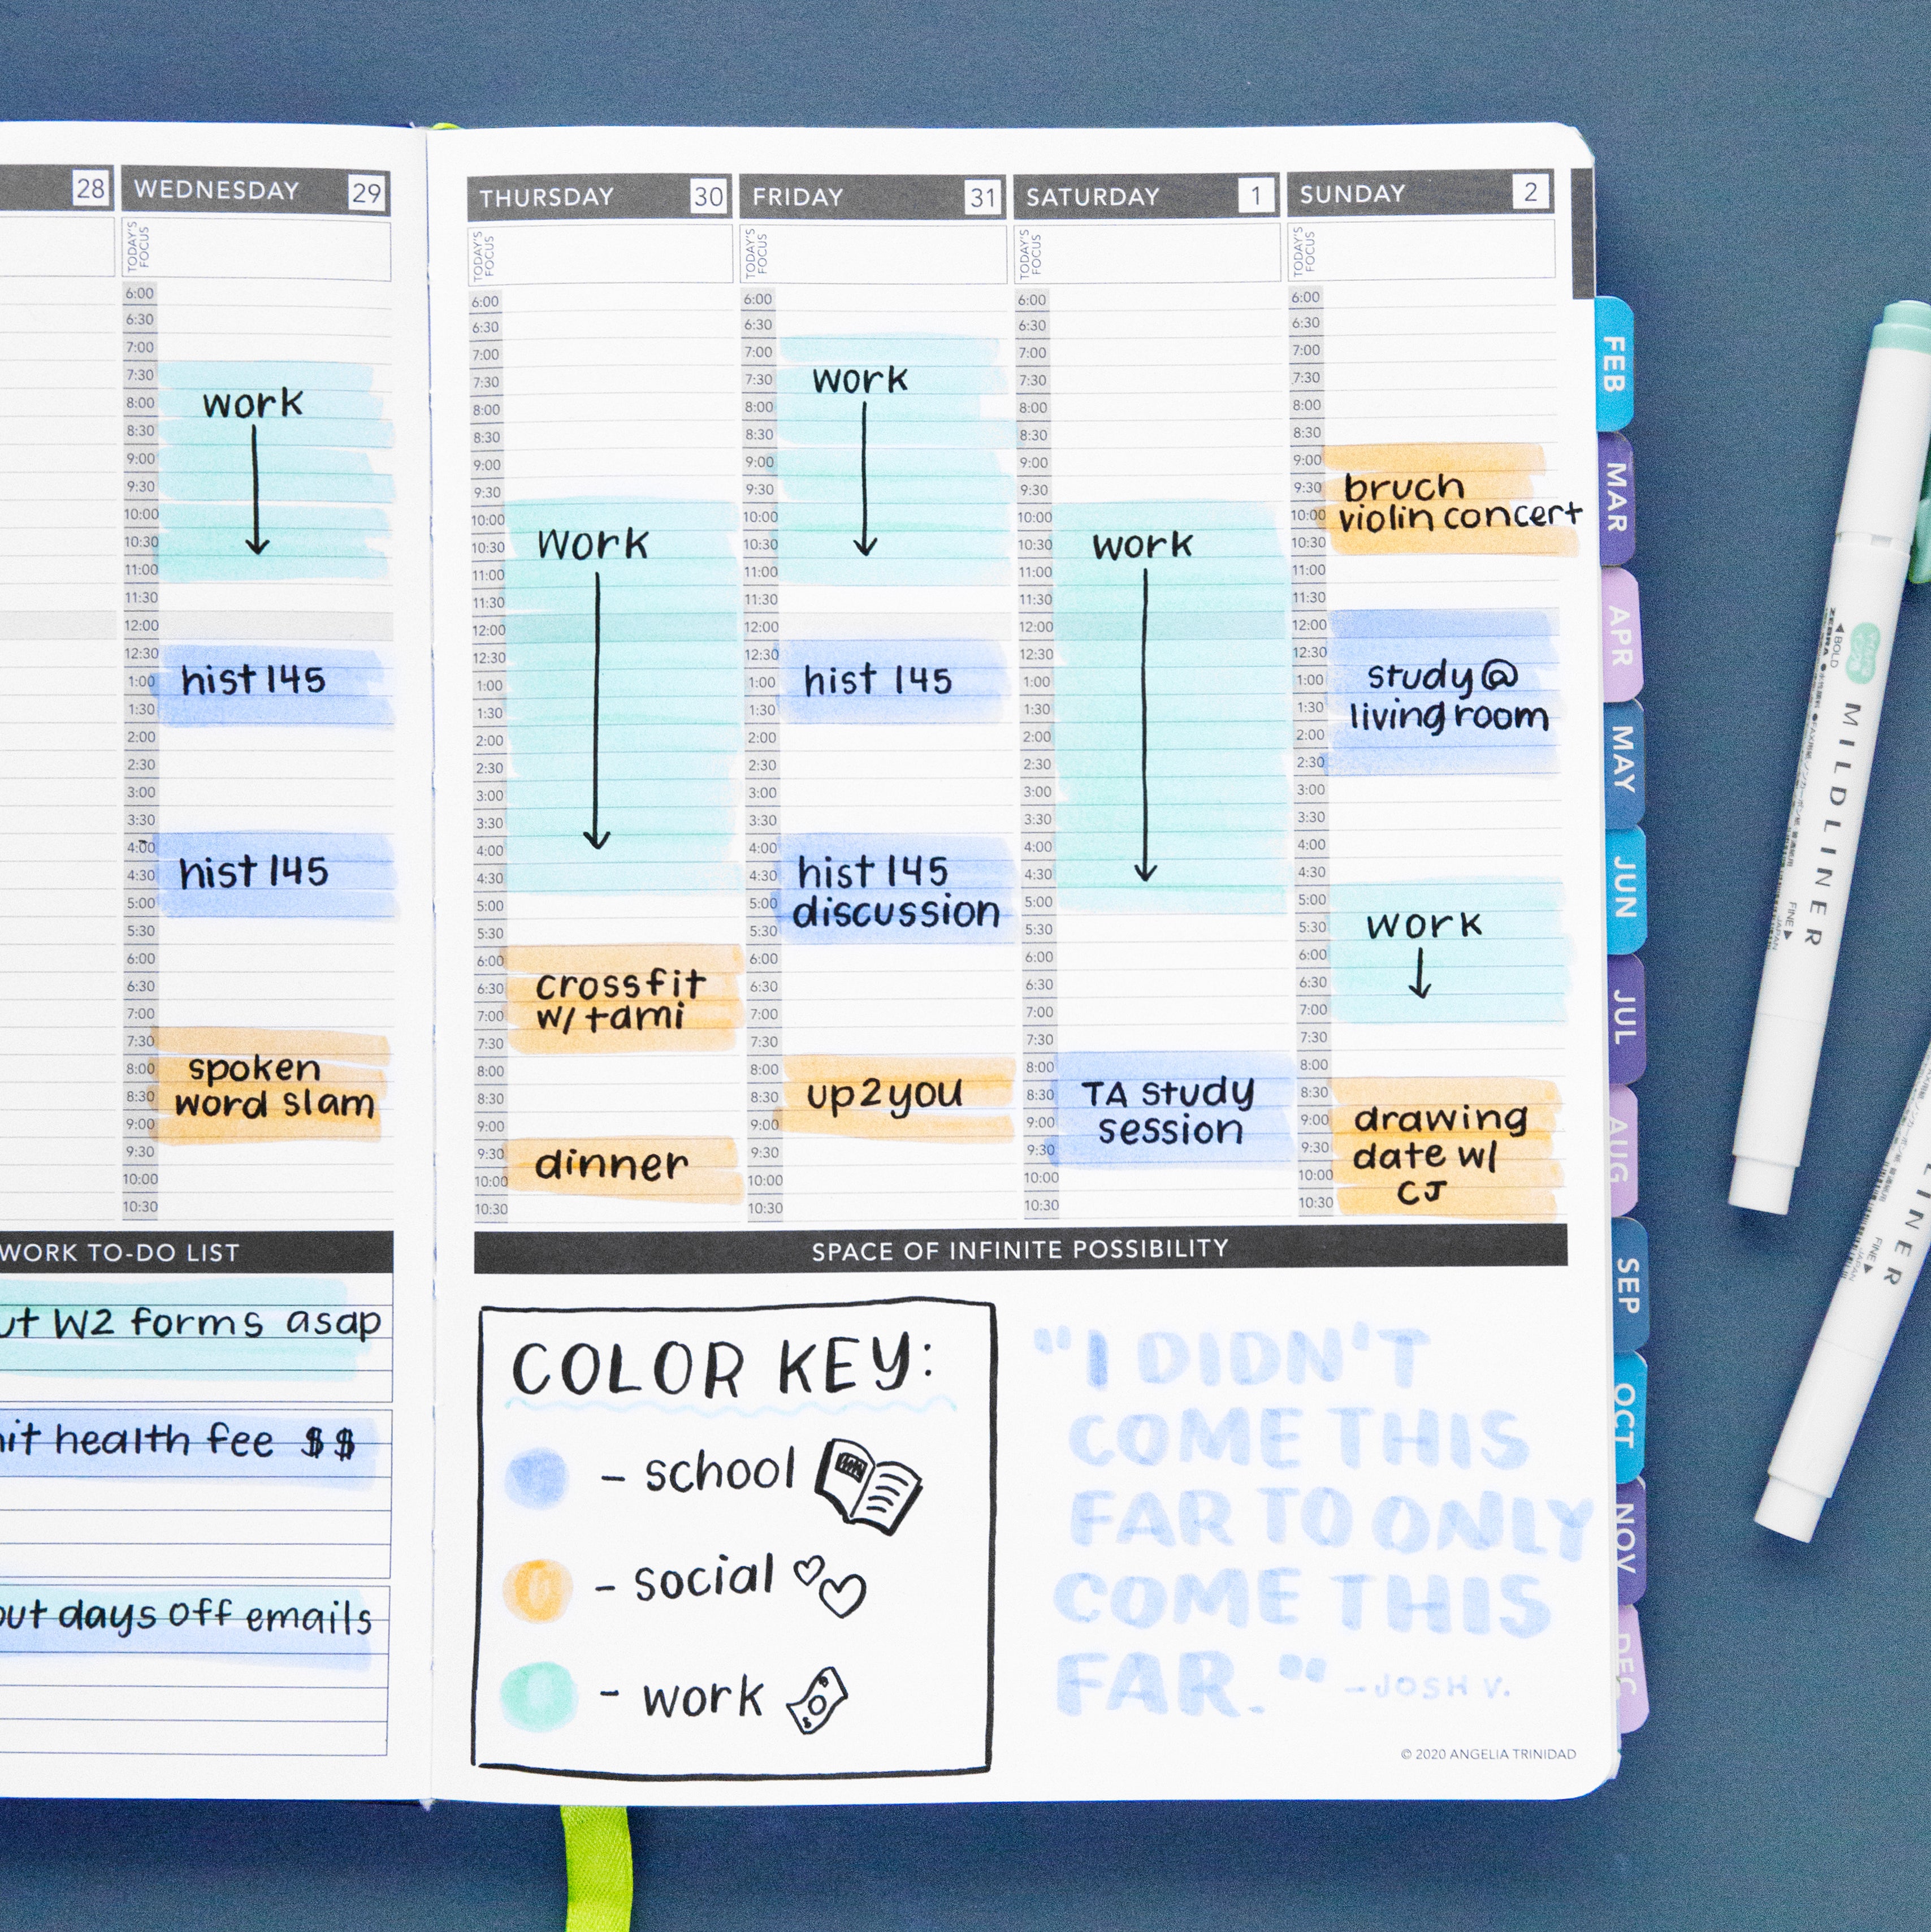 5 Ways to Use a Planner Effectively